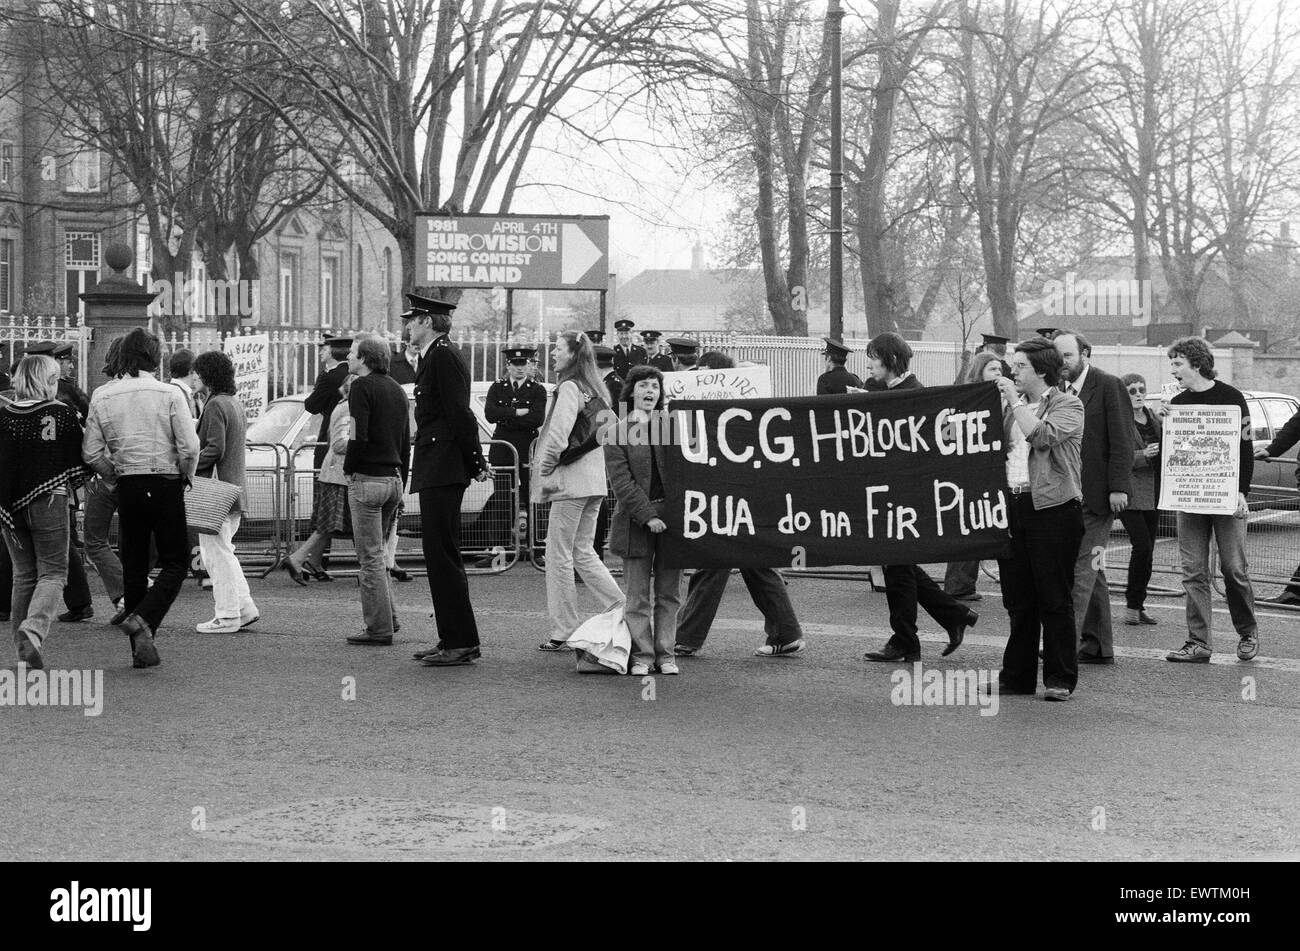 Protest during the Eurovision Song Contest in Dublin. The demonstration is in support of H block prisoners at Ulster's Maze jail. 4th April 1981. Stock Photo